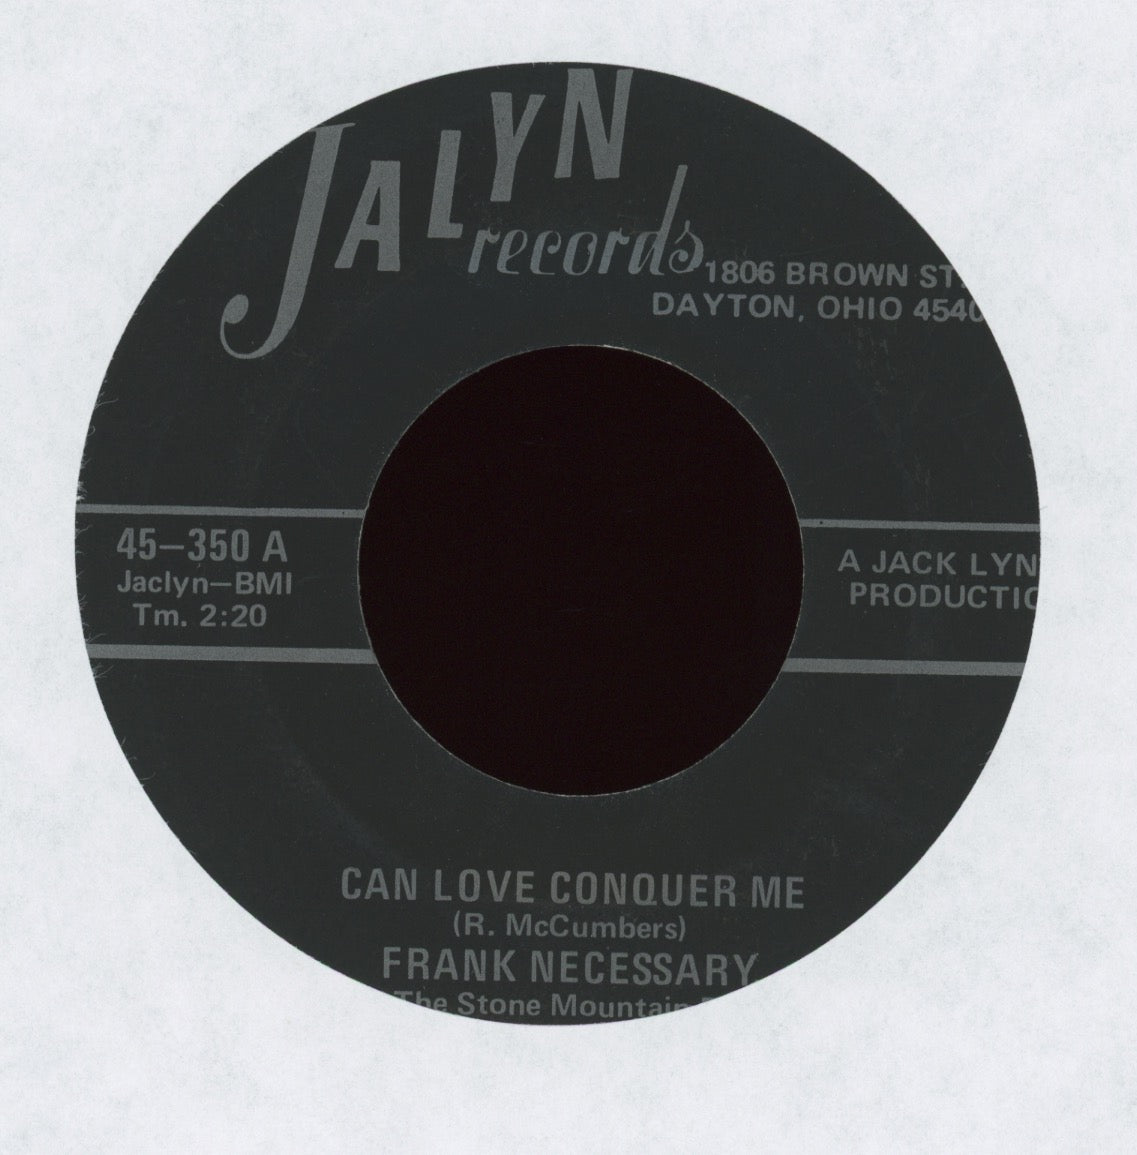 Frank Necessary - Can Love Conquer Me on Jalyn